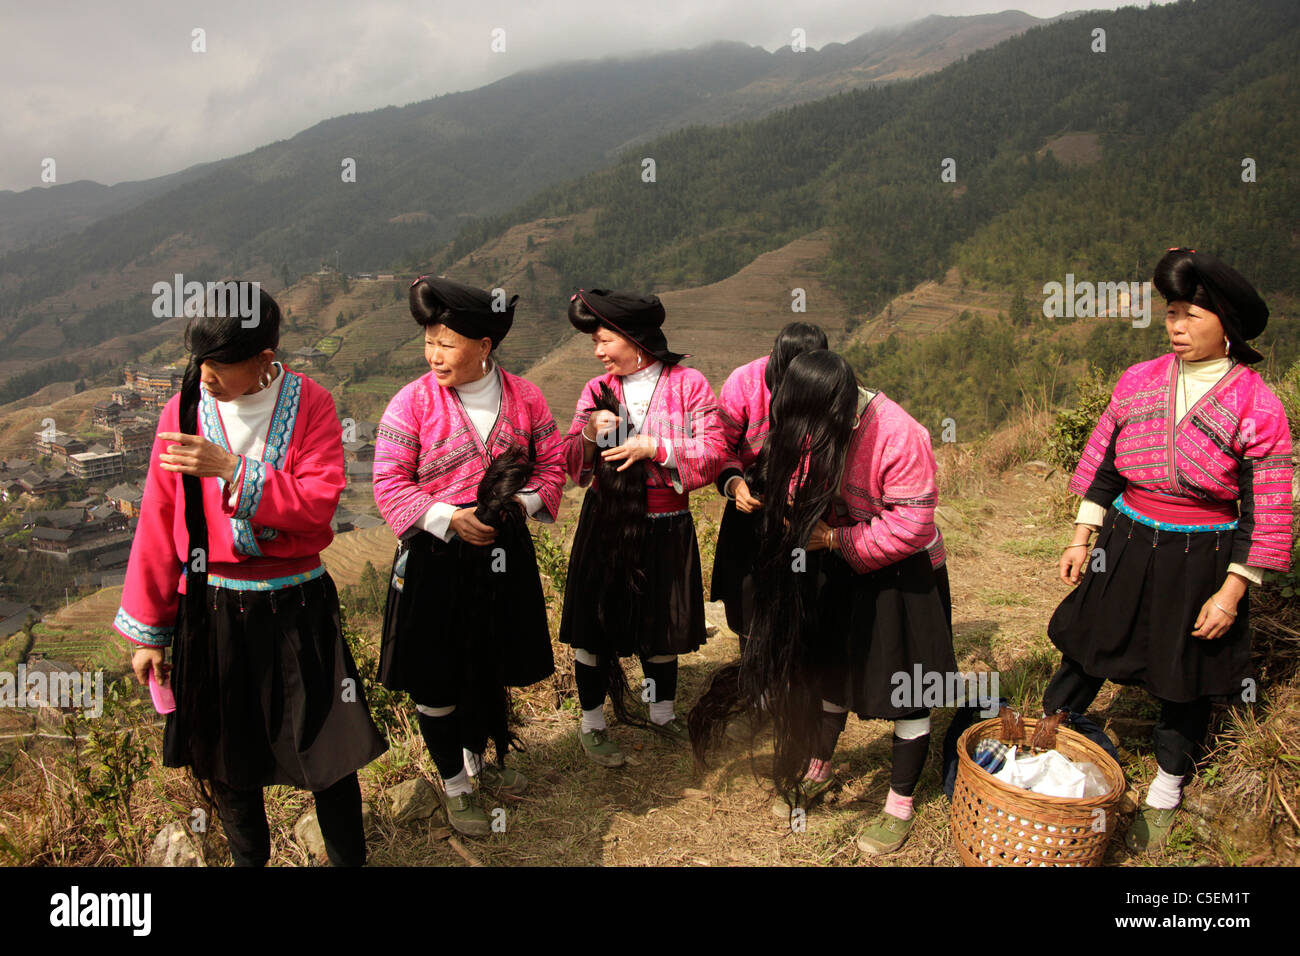 Women of the Yao minority with traditional costumes and their characteristic hairstyle at Ping An near Longsheng, Guangxi, China Stock Photo